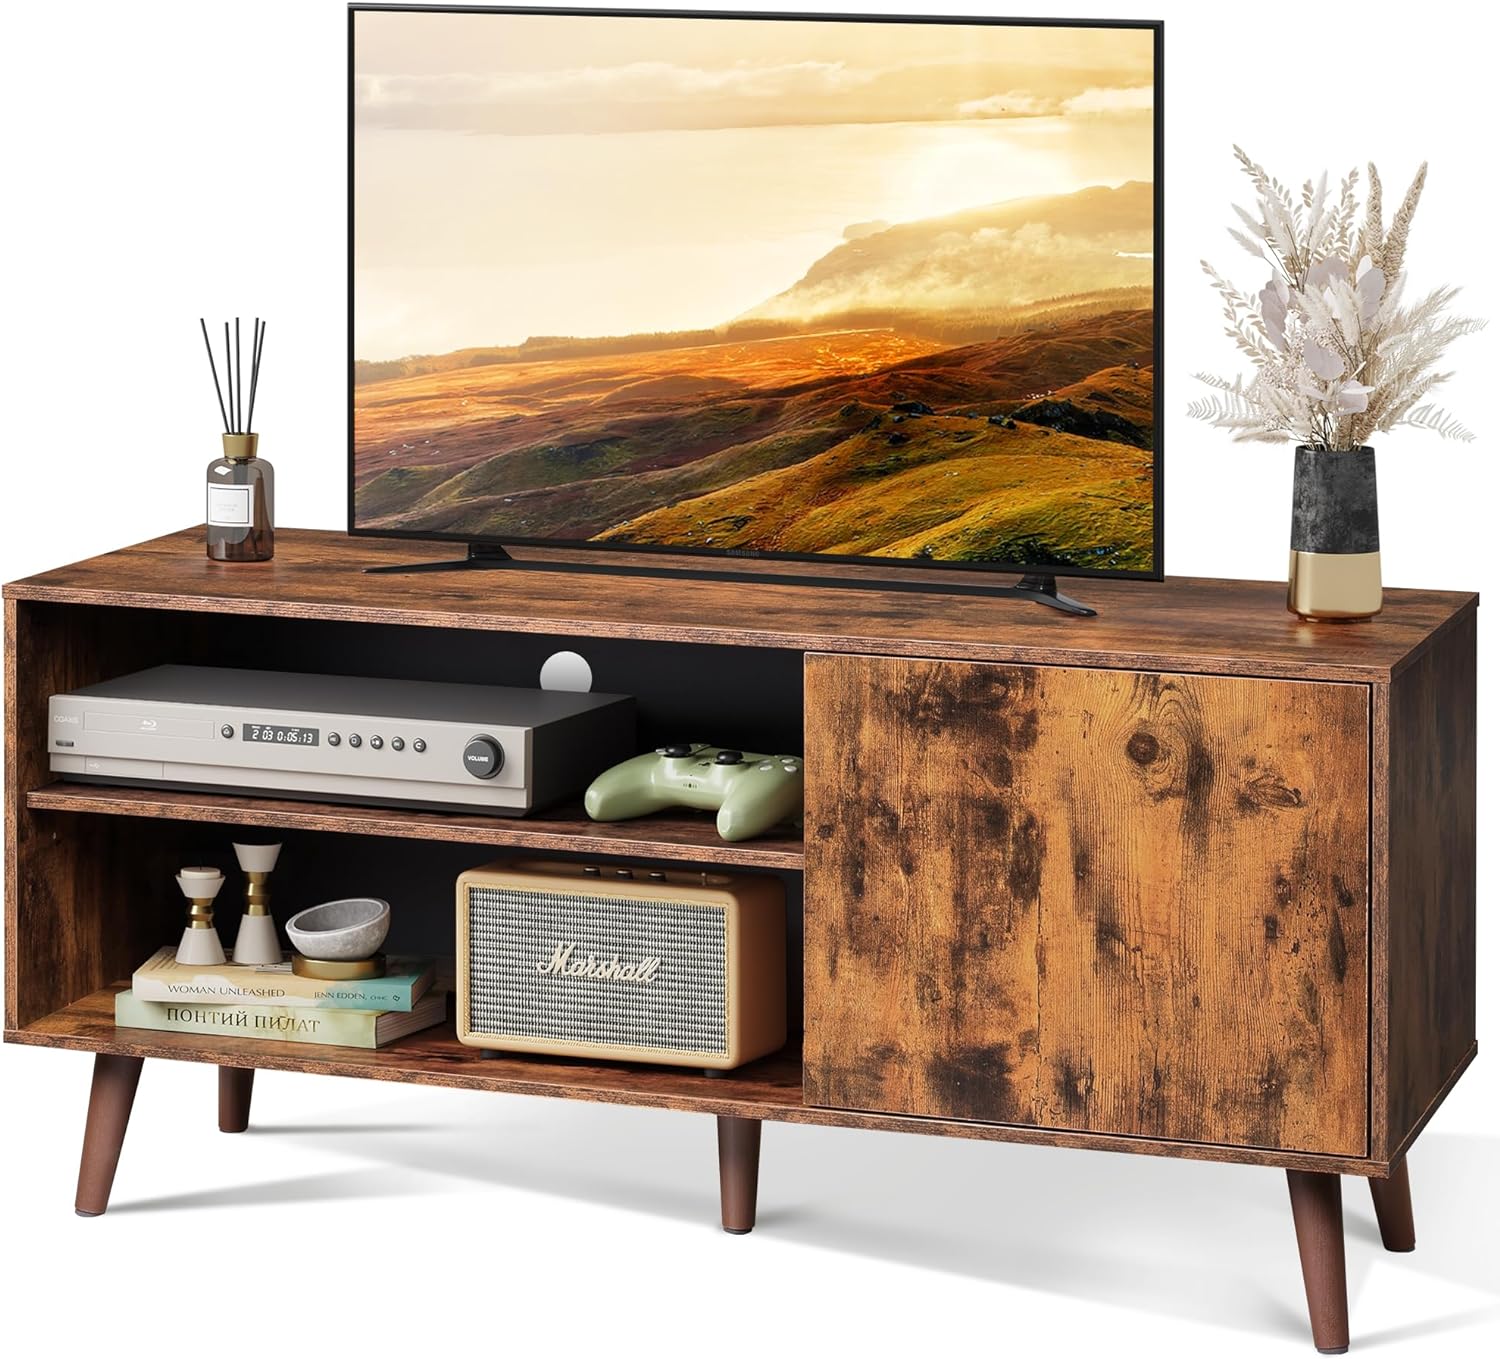 WLIVE Mid-Century Modern TV Stand for 55 TV, Entertainment Center with Storage, Open Shelves TV Console for Living Room and Bedroom, Retro Brown